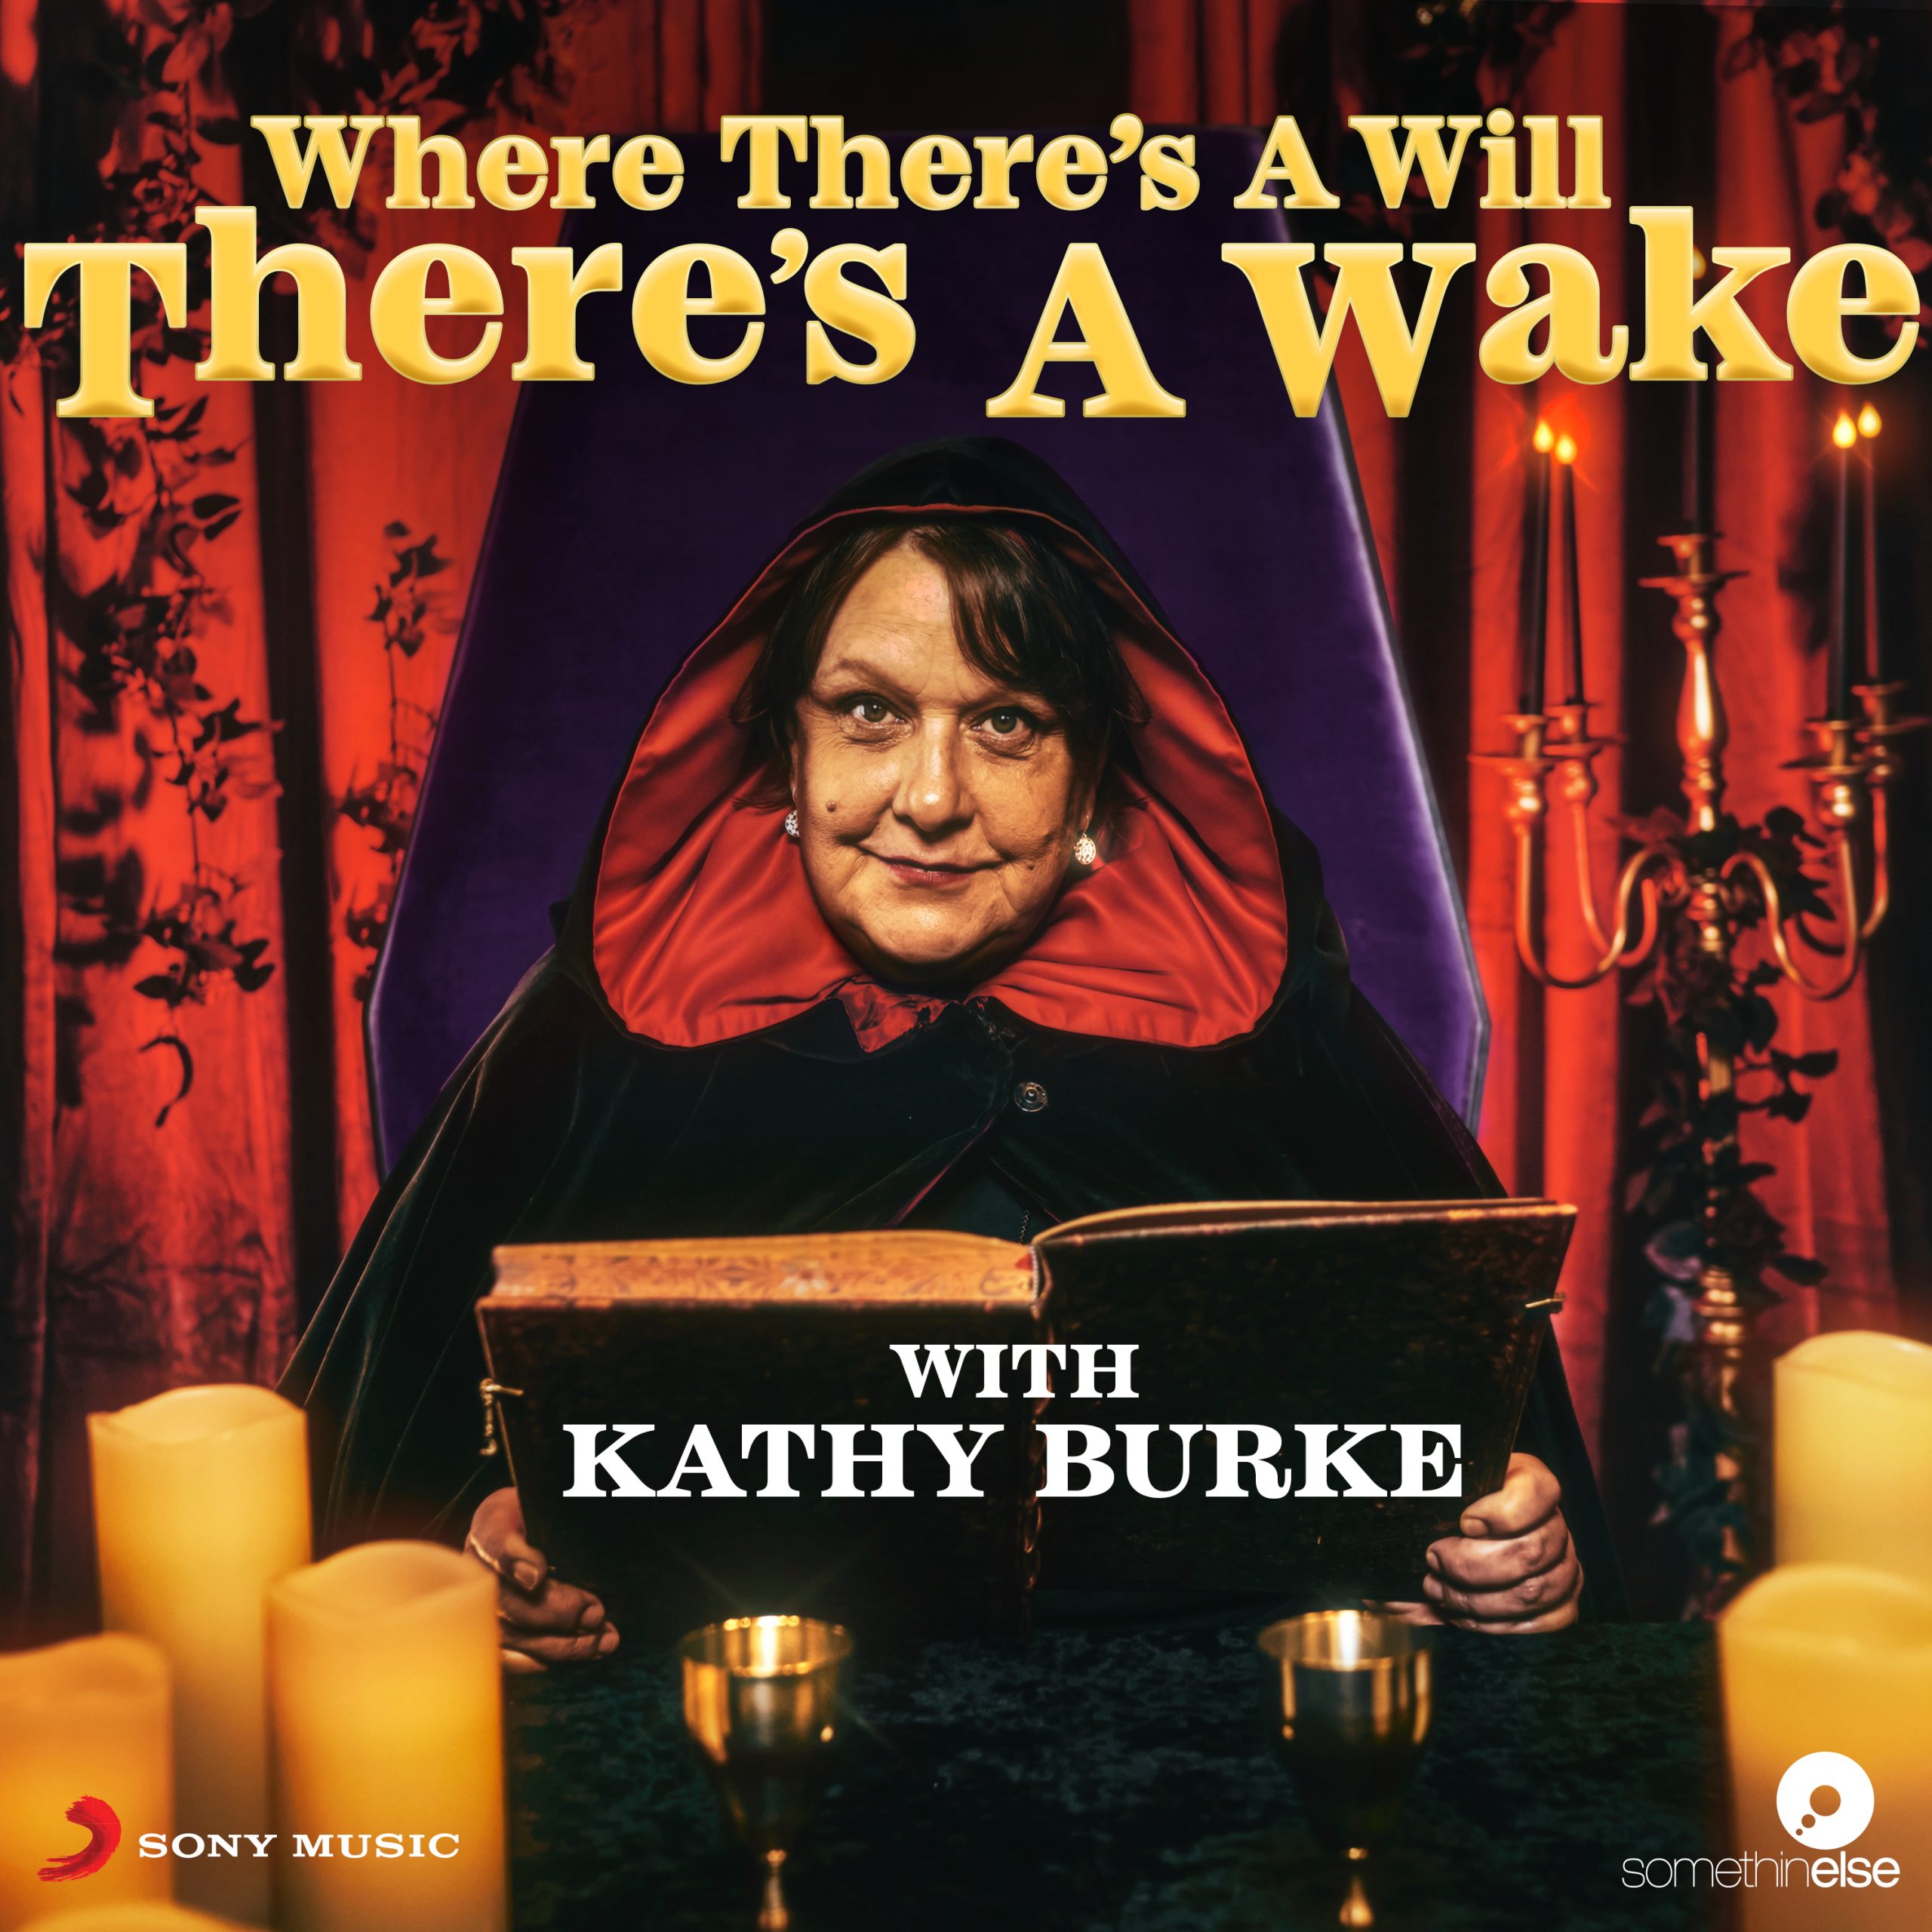 Kathy Burke in a coffin chair, reading from a book with candles around her